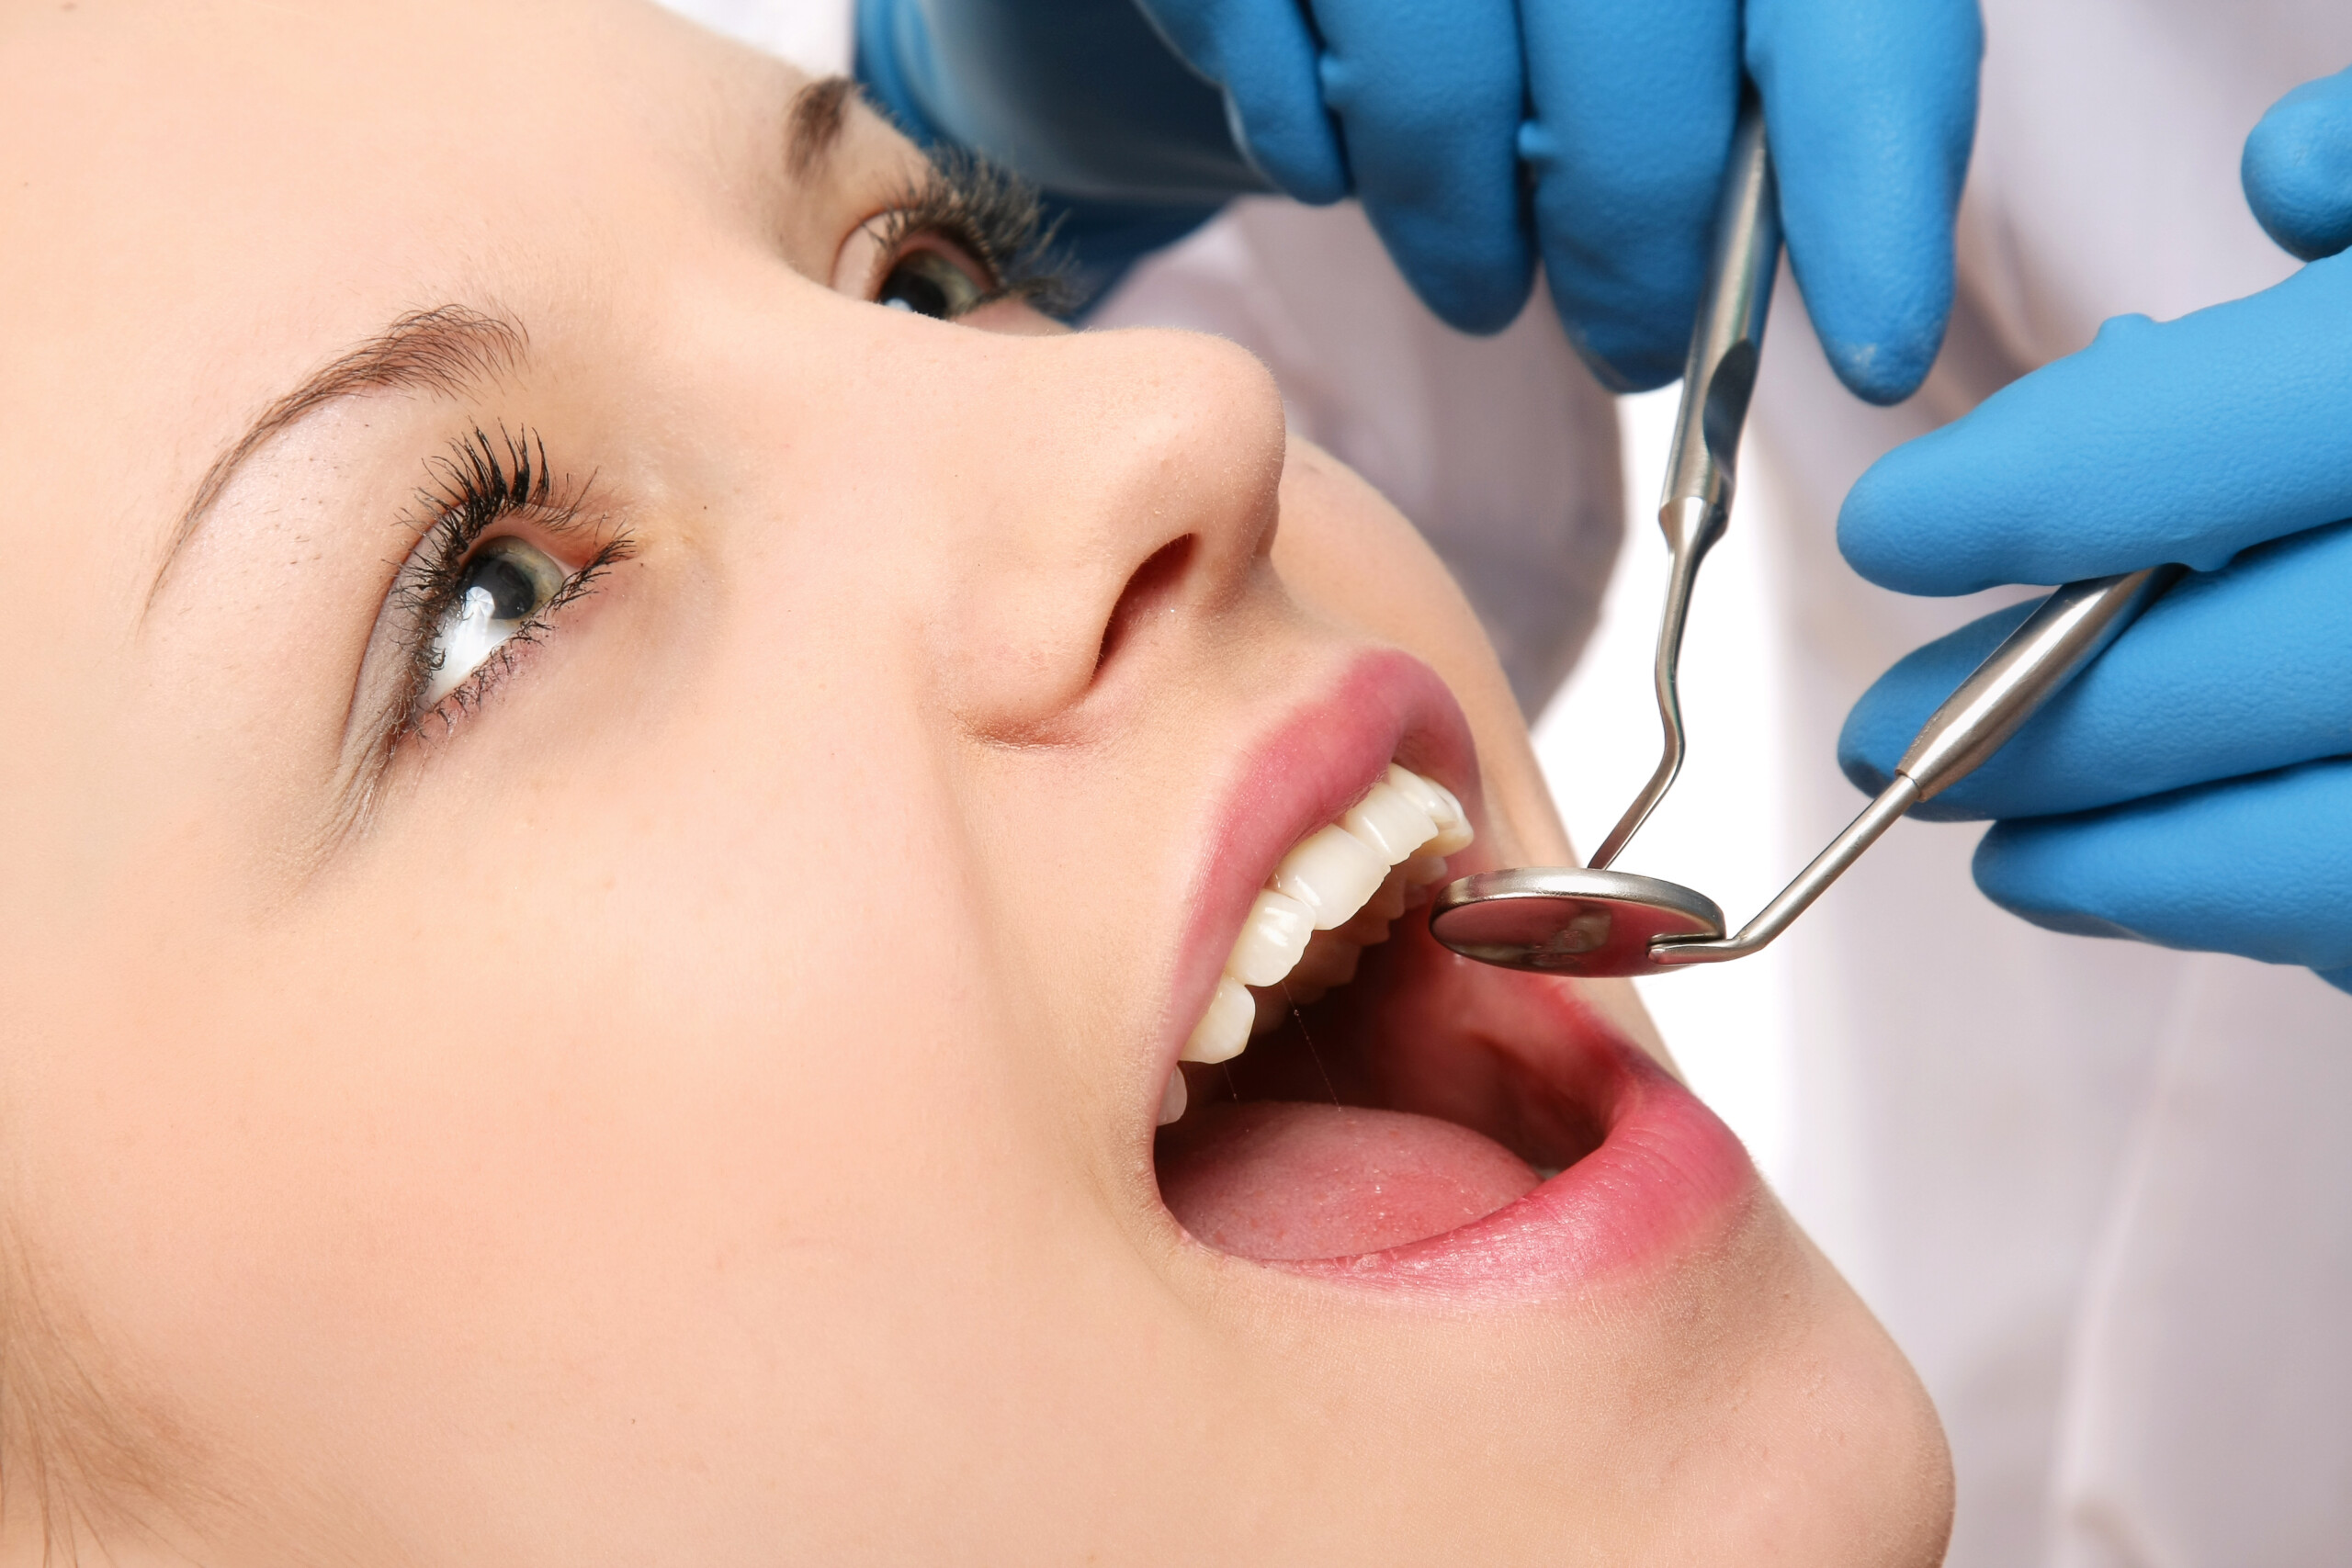 Can Repetitive Teeth Clicking Harm the Teeth or Bite Alignment?